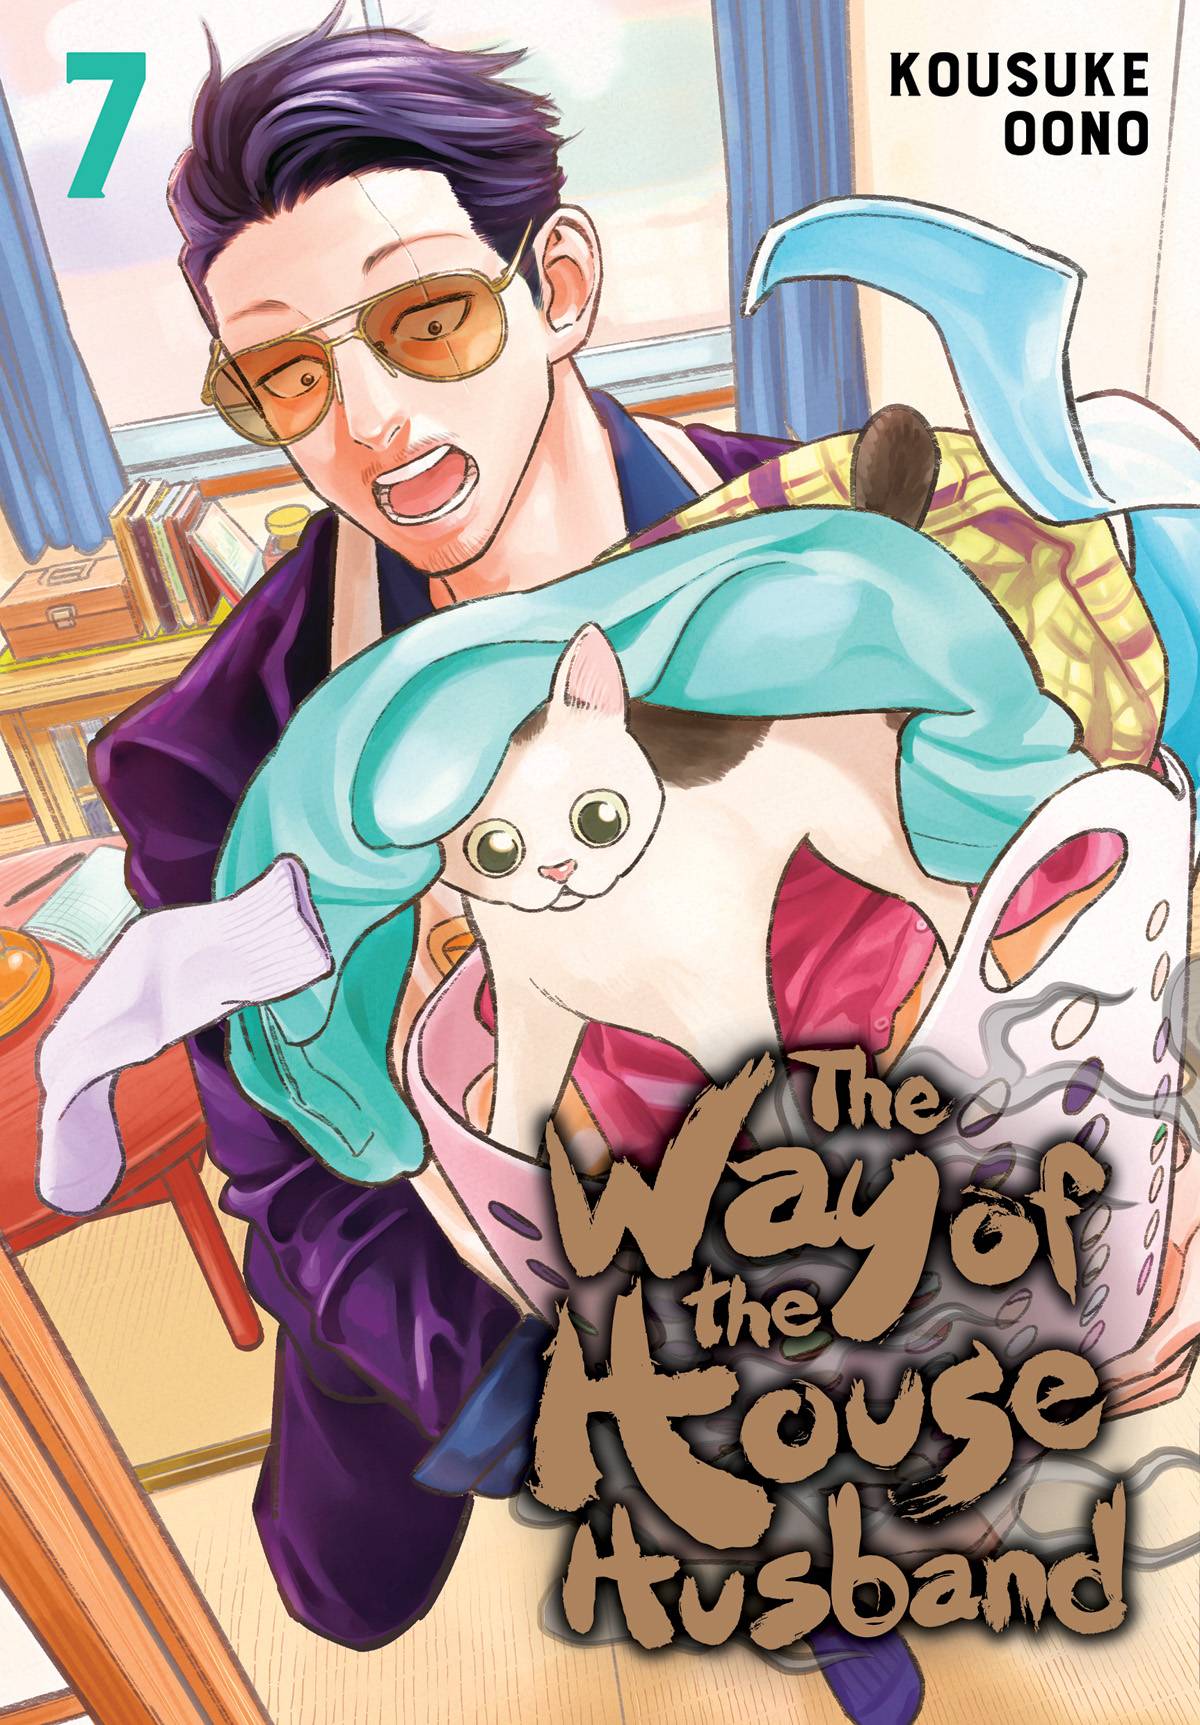 Way of the Househusband Volume 7